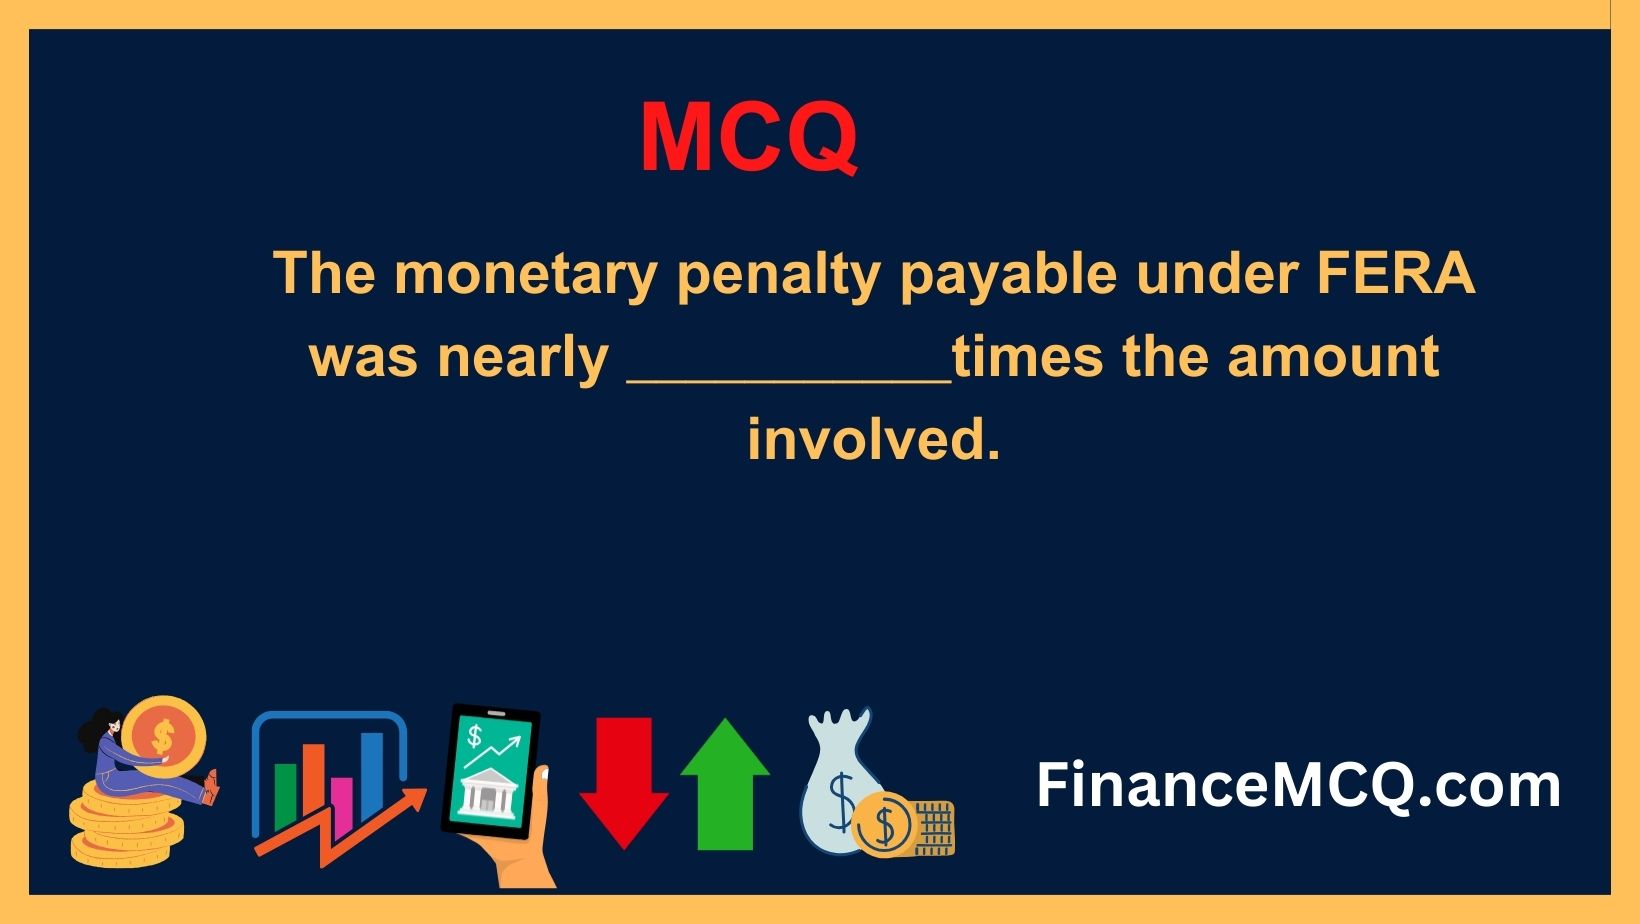 The monetary penalty payable under FERA was nearly ___________times the amount involved.